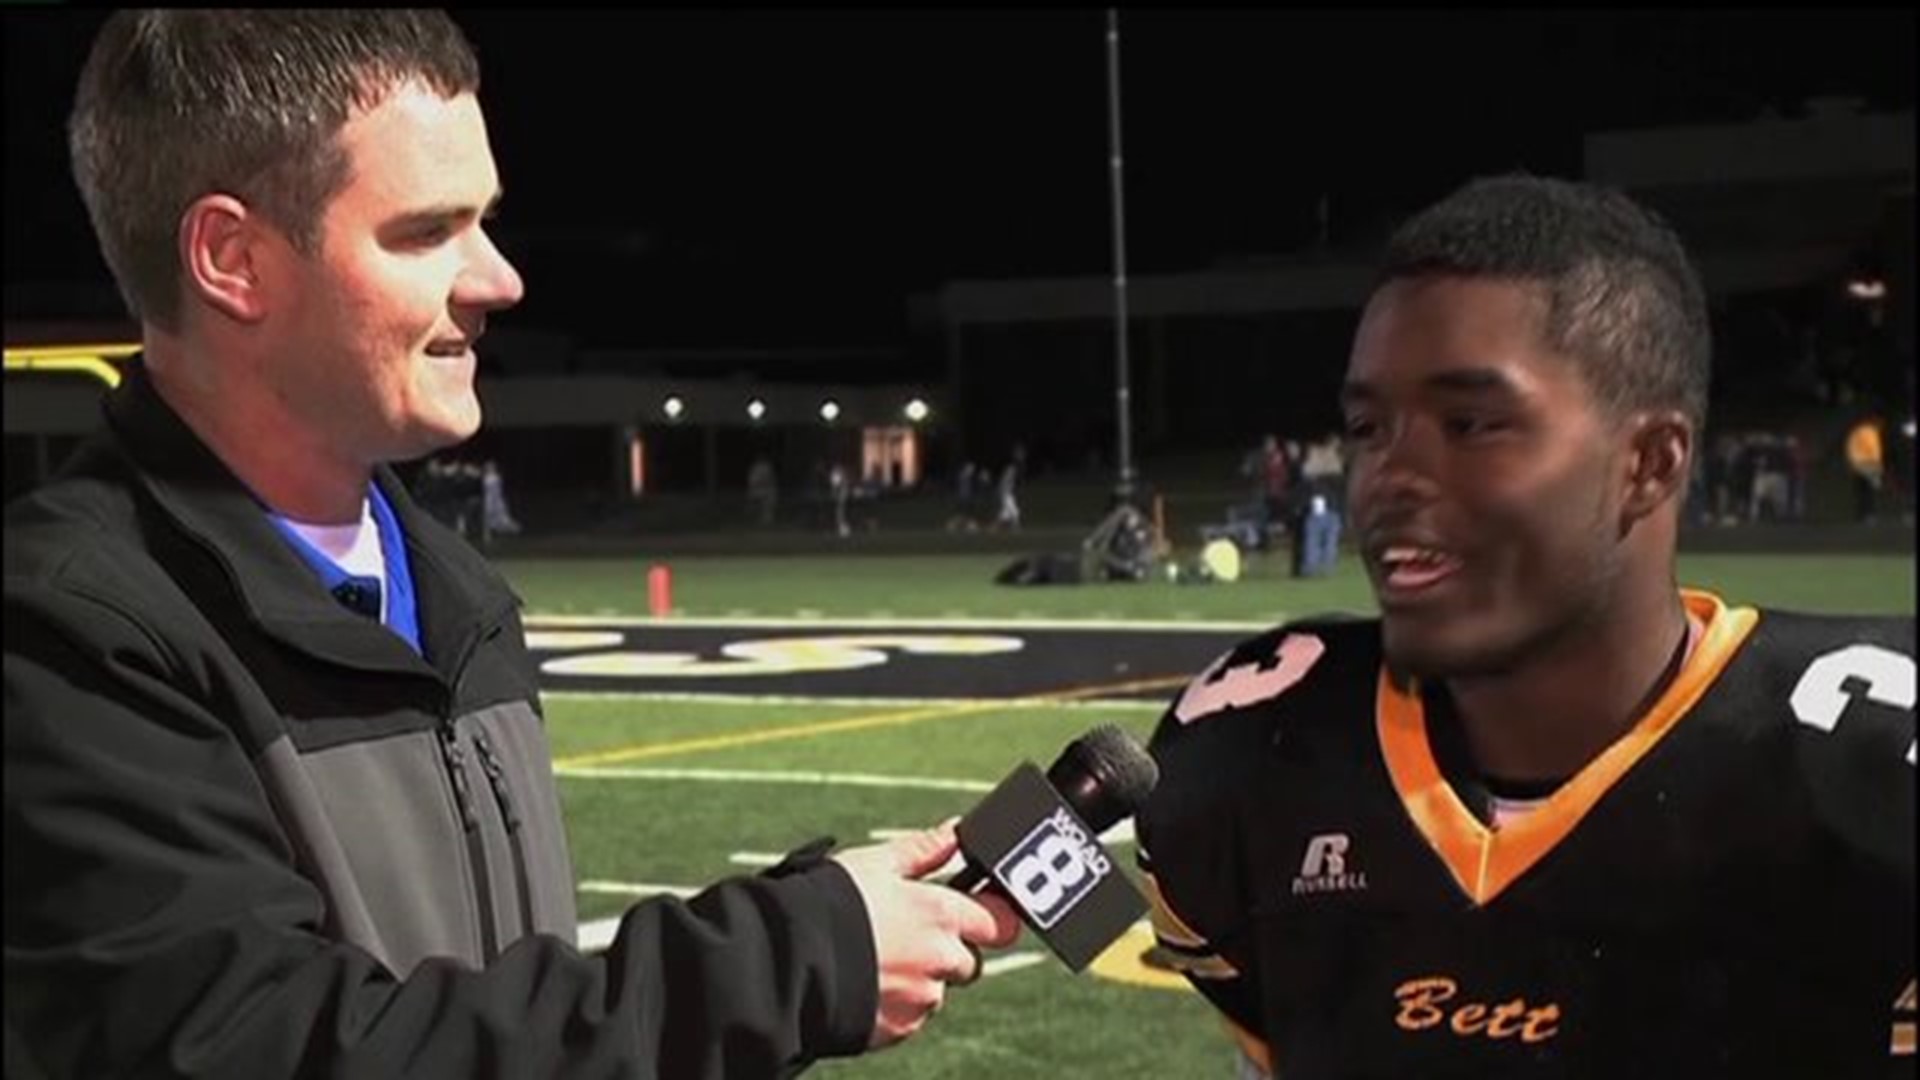 Bettendorf Talks About the Big Win